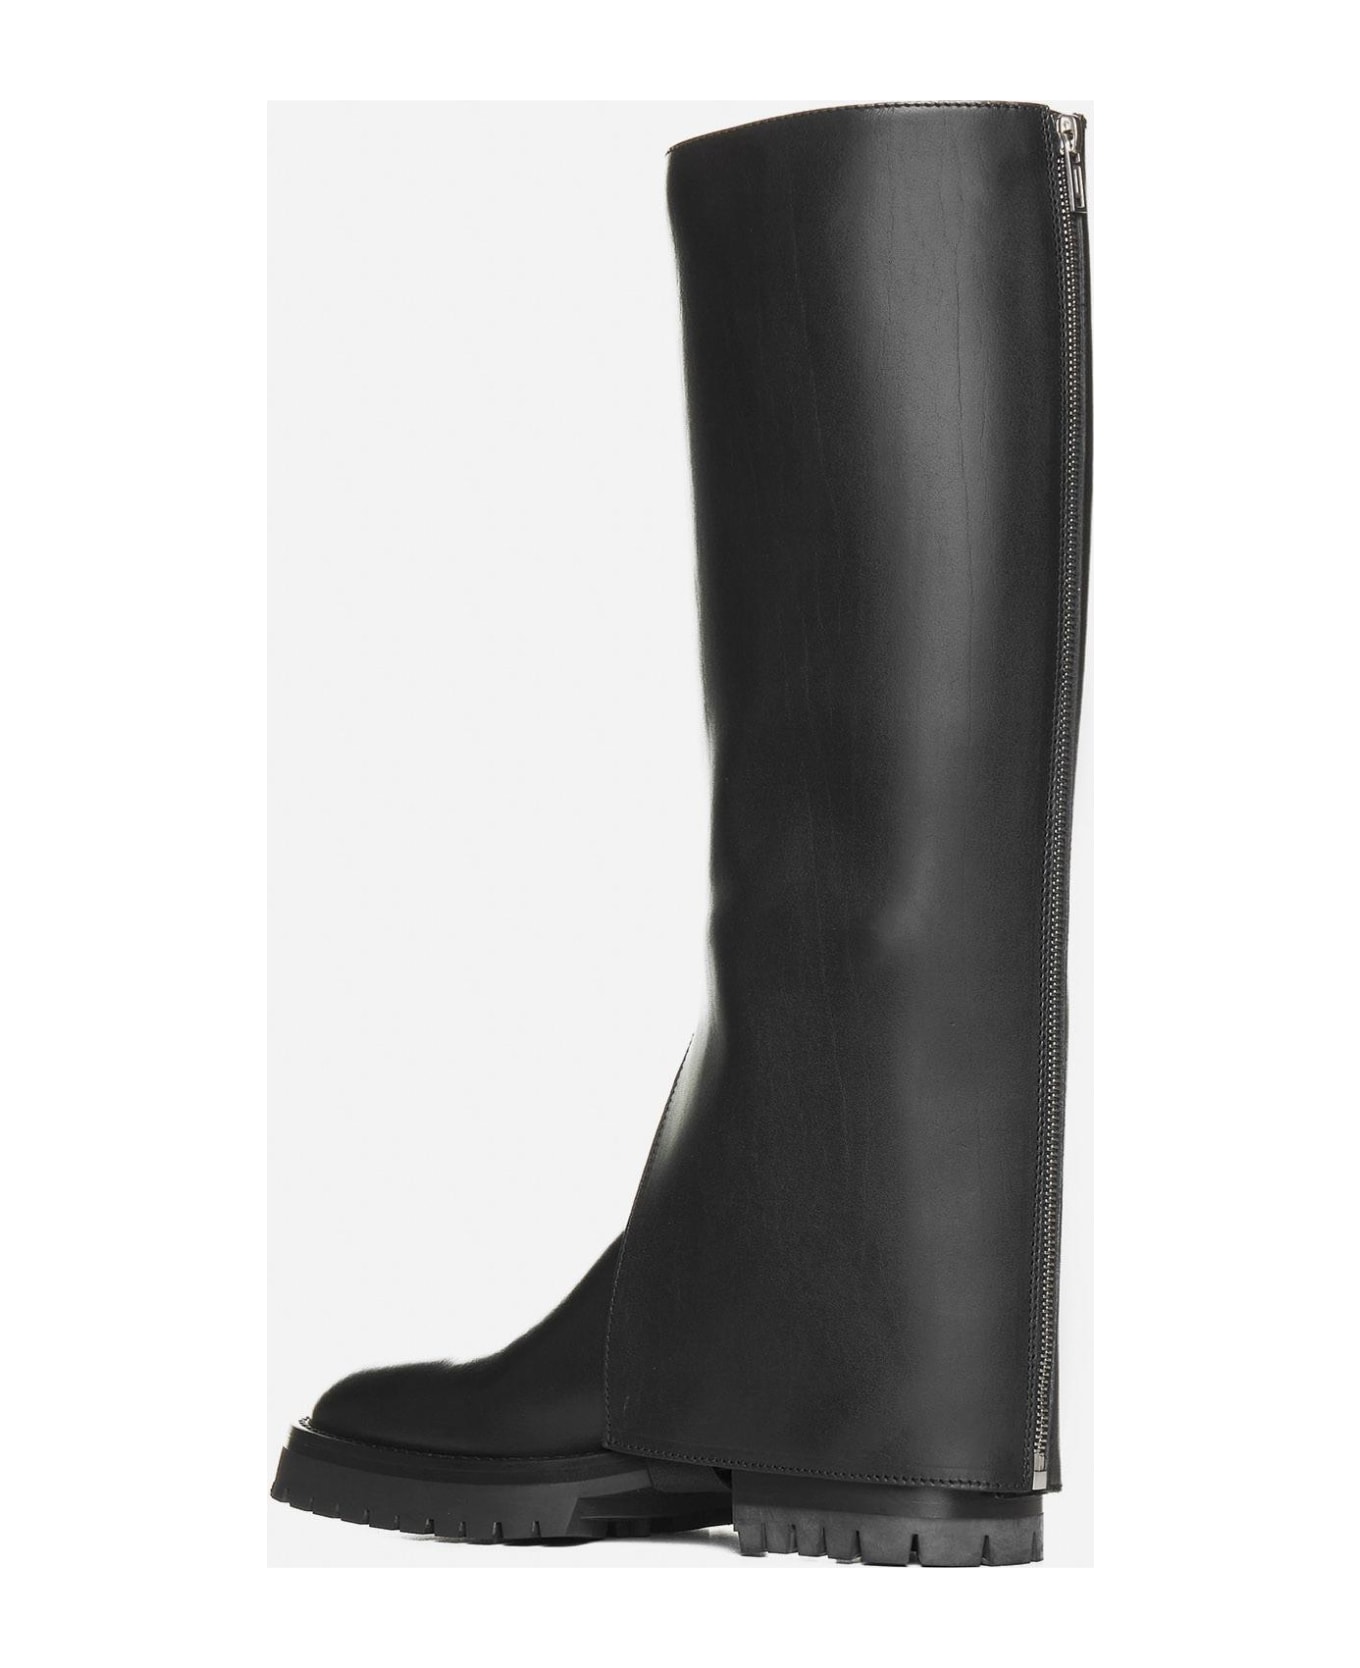 Ann Demeulemeester Jay Leather Boots - BLACK